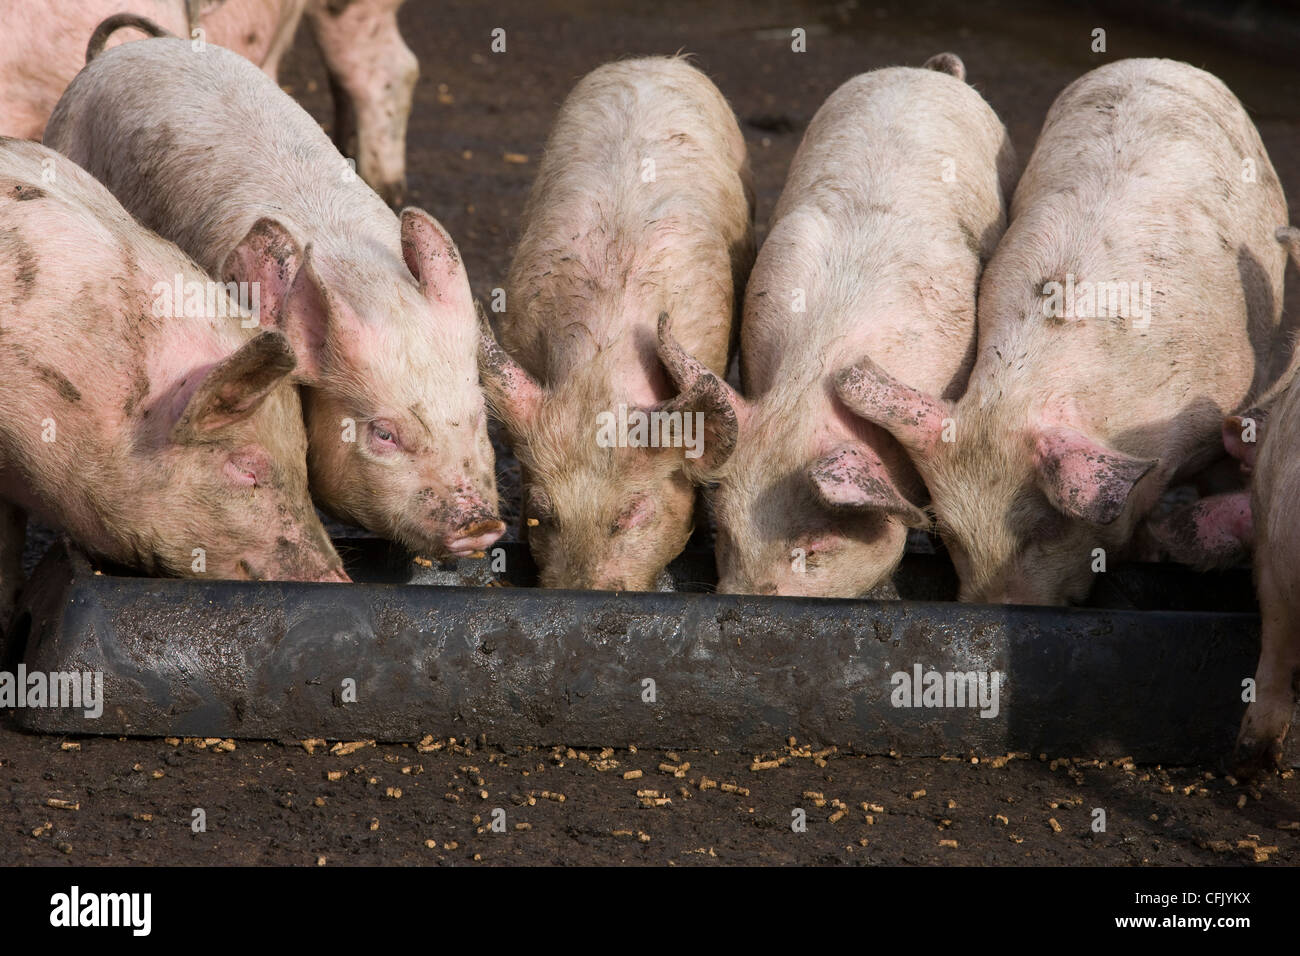 pigs-feeding-from-a-metal-trough-at-feed